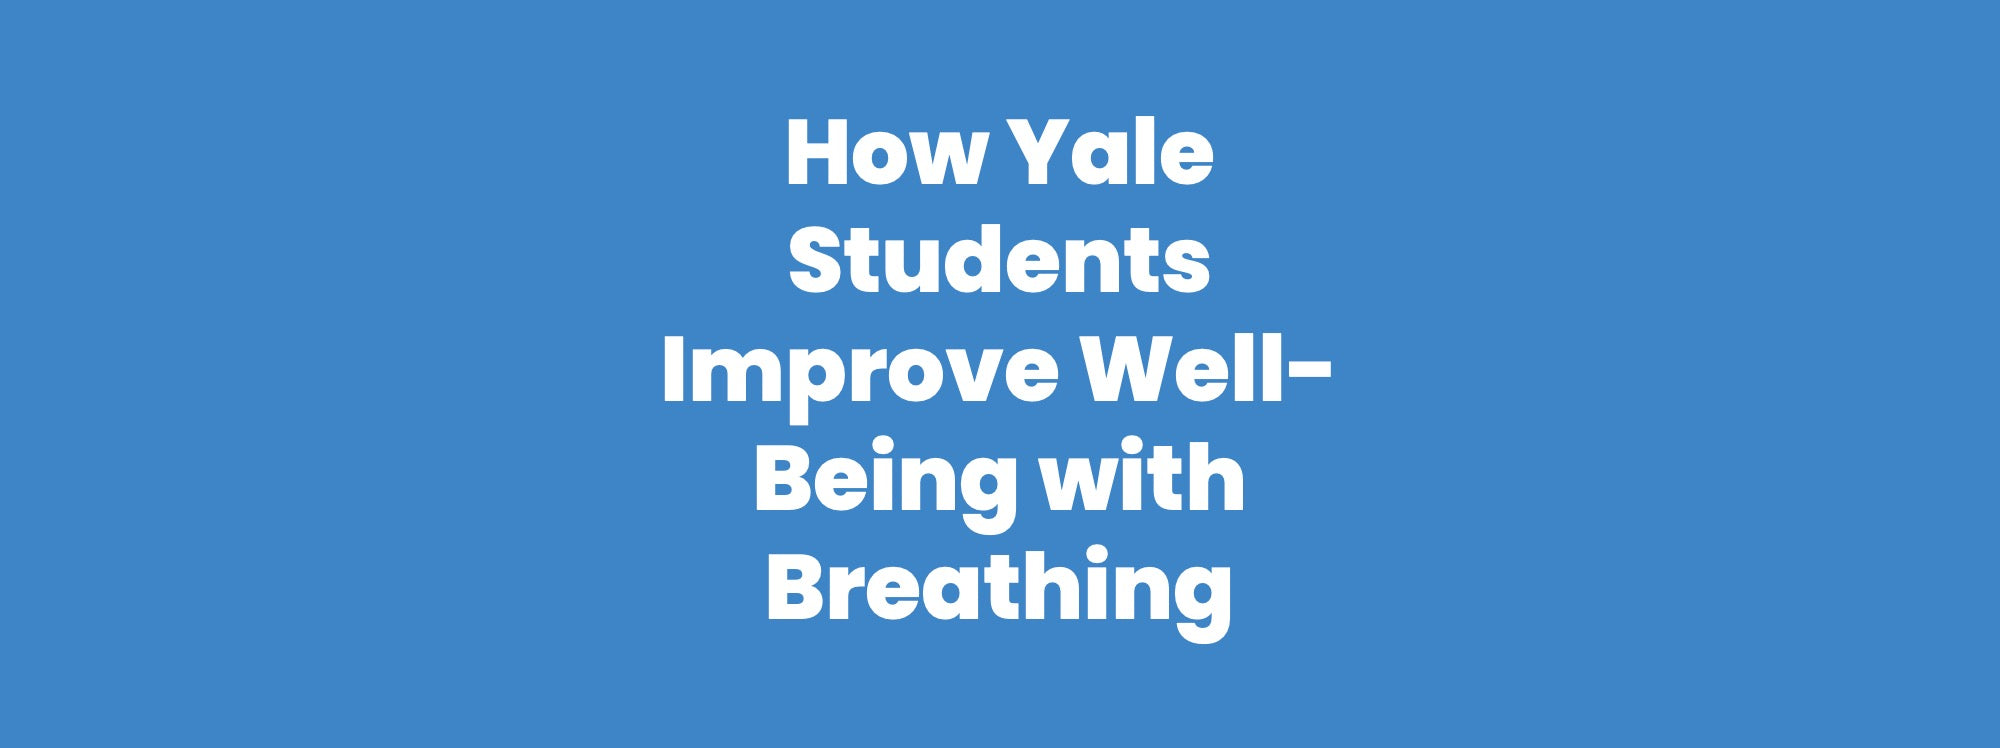 How Yale Students Improve Well-Being with Breathing